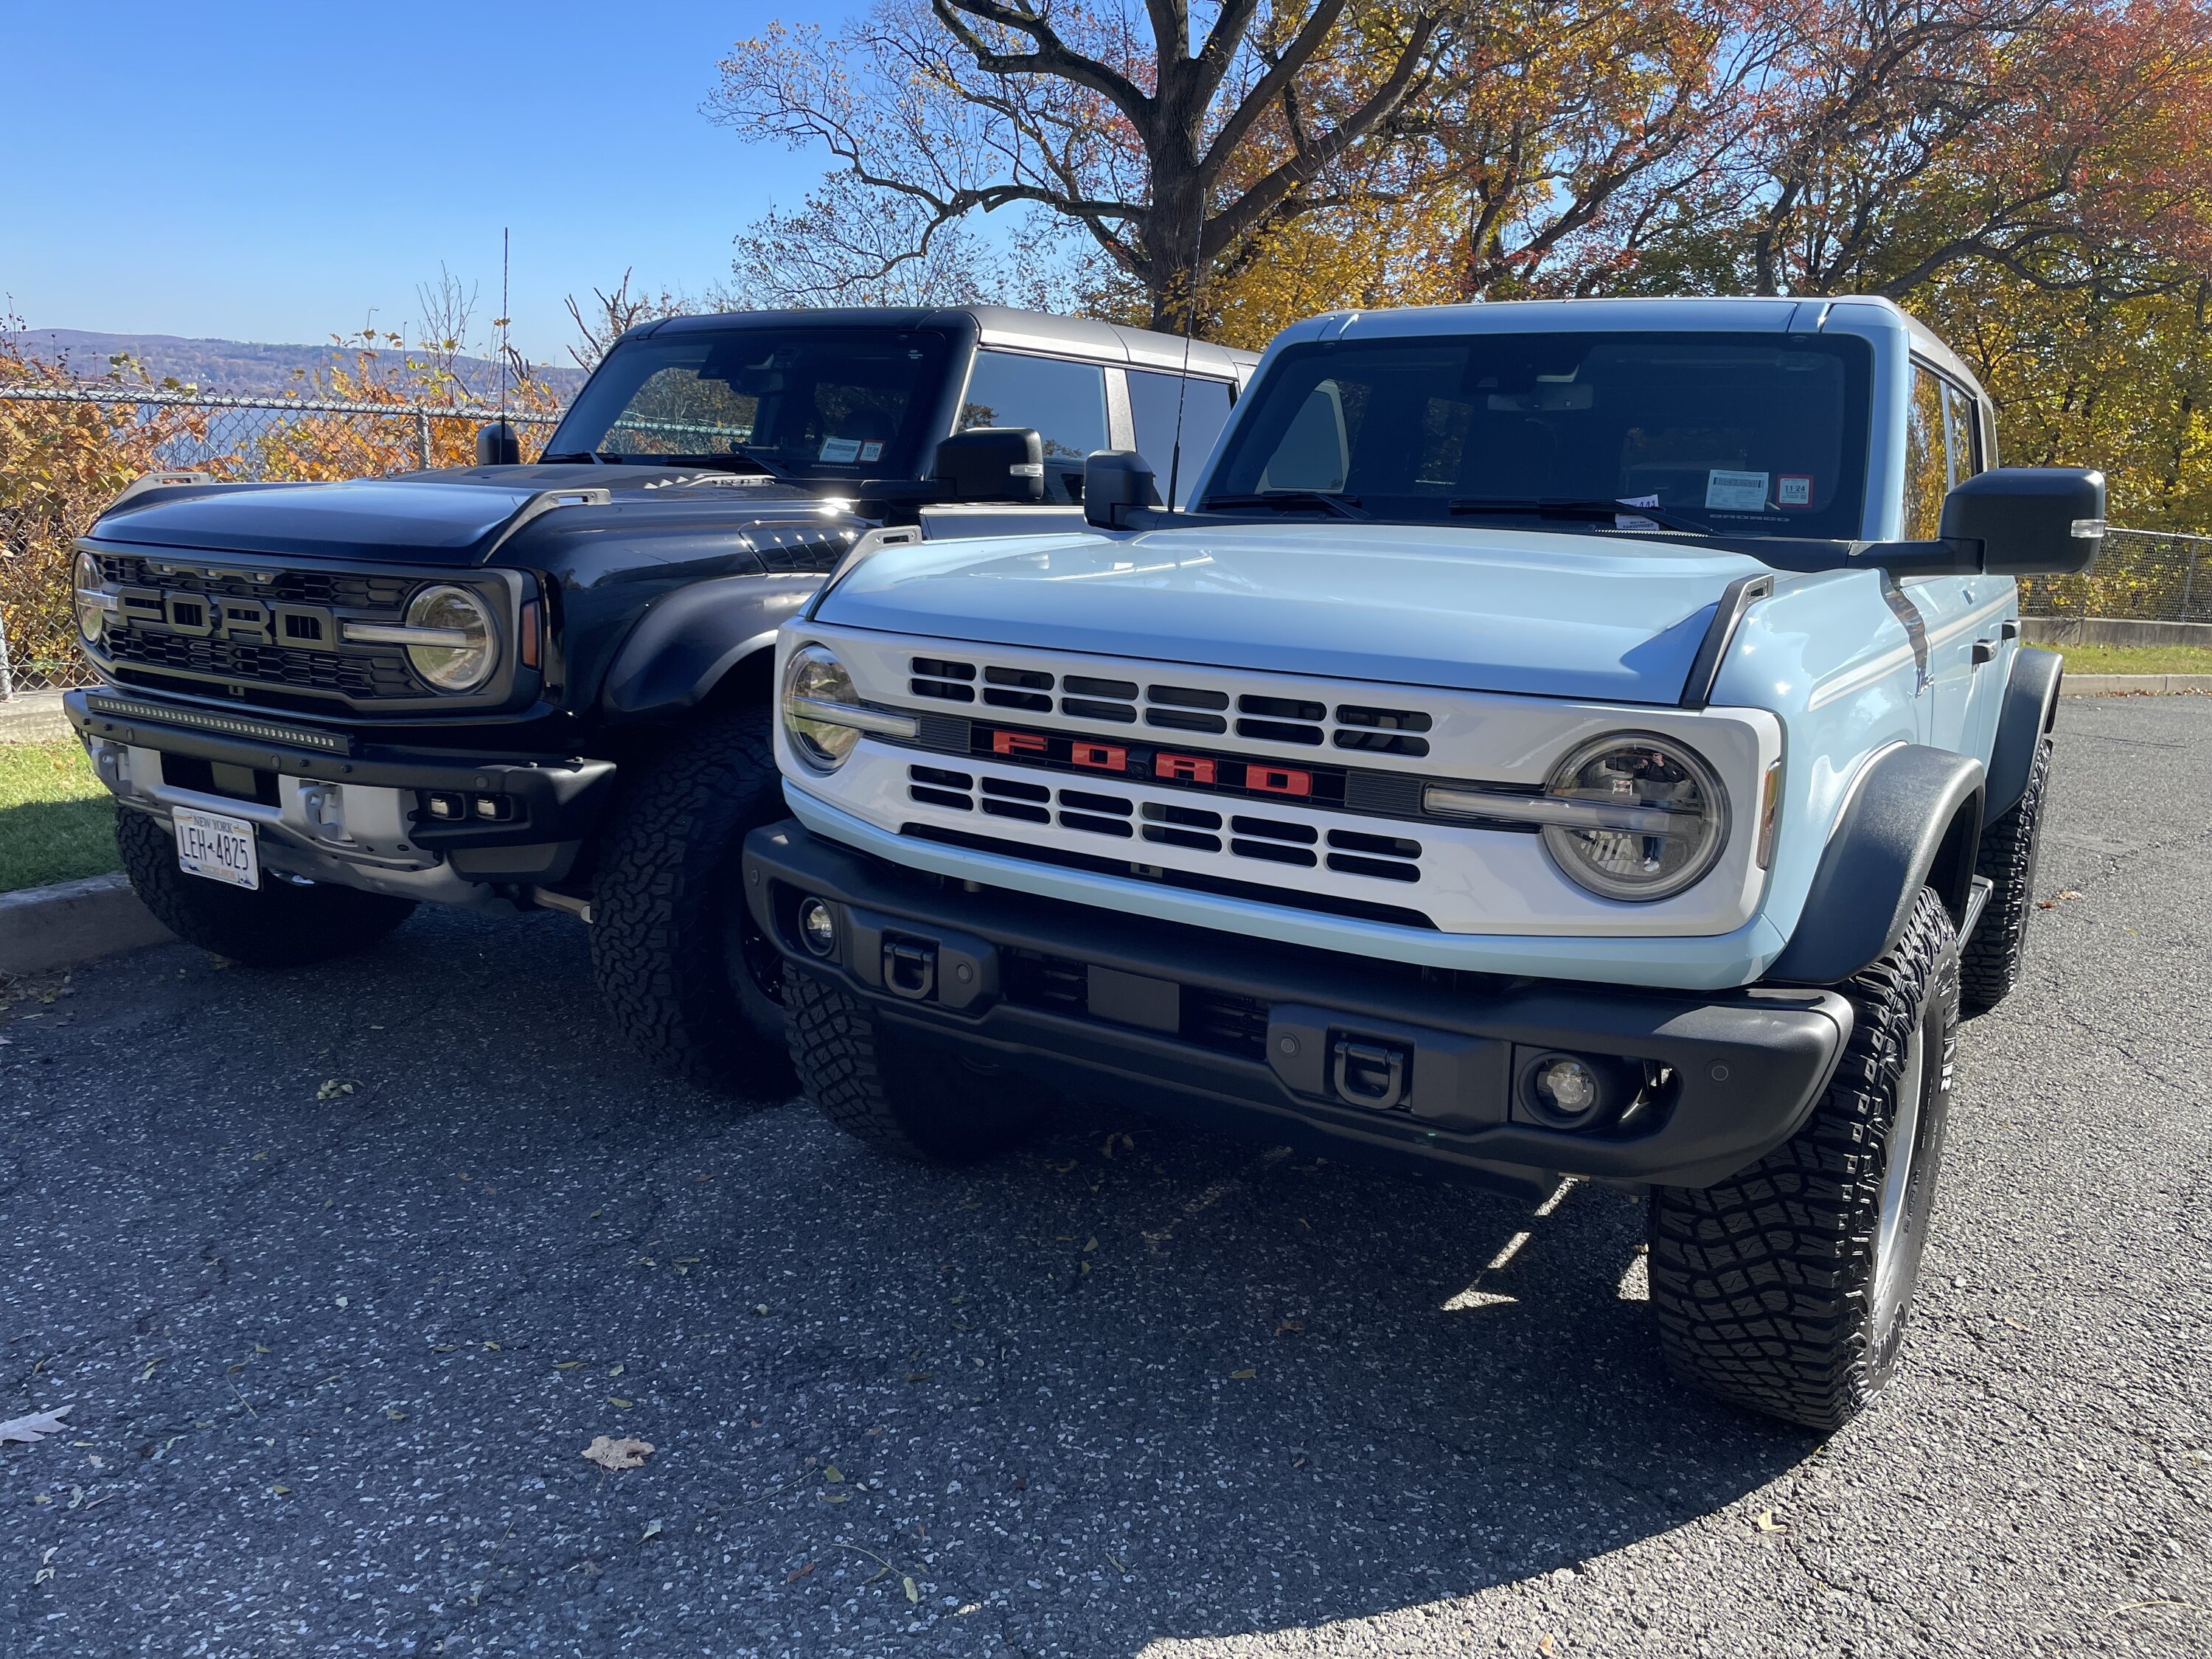 Ford Bronco Heritage dilemma IMG_5098